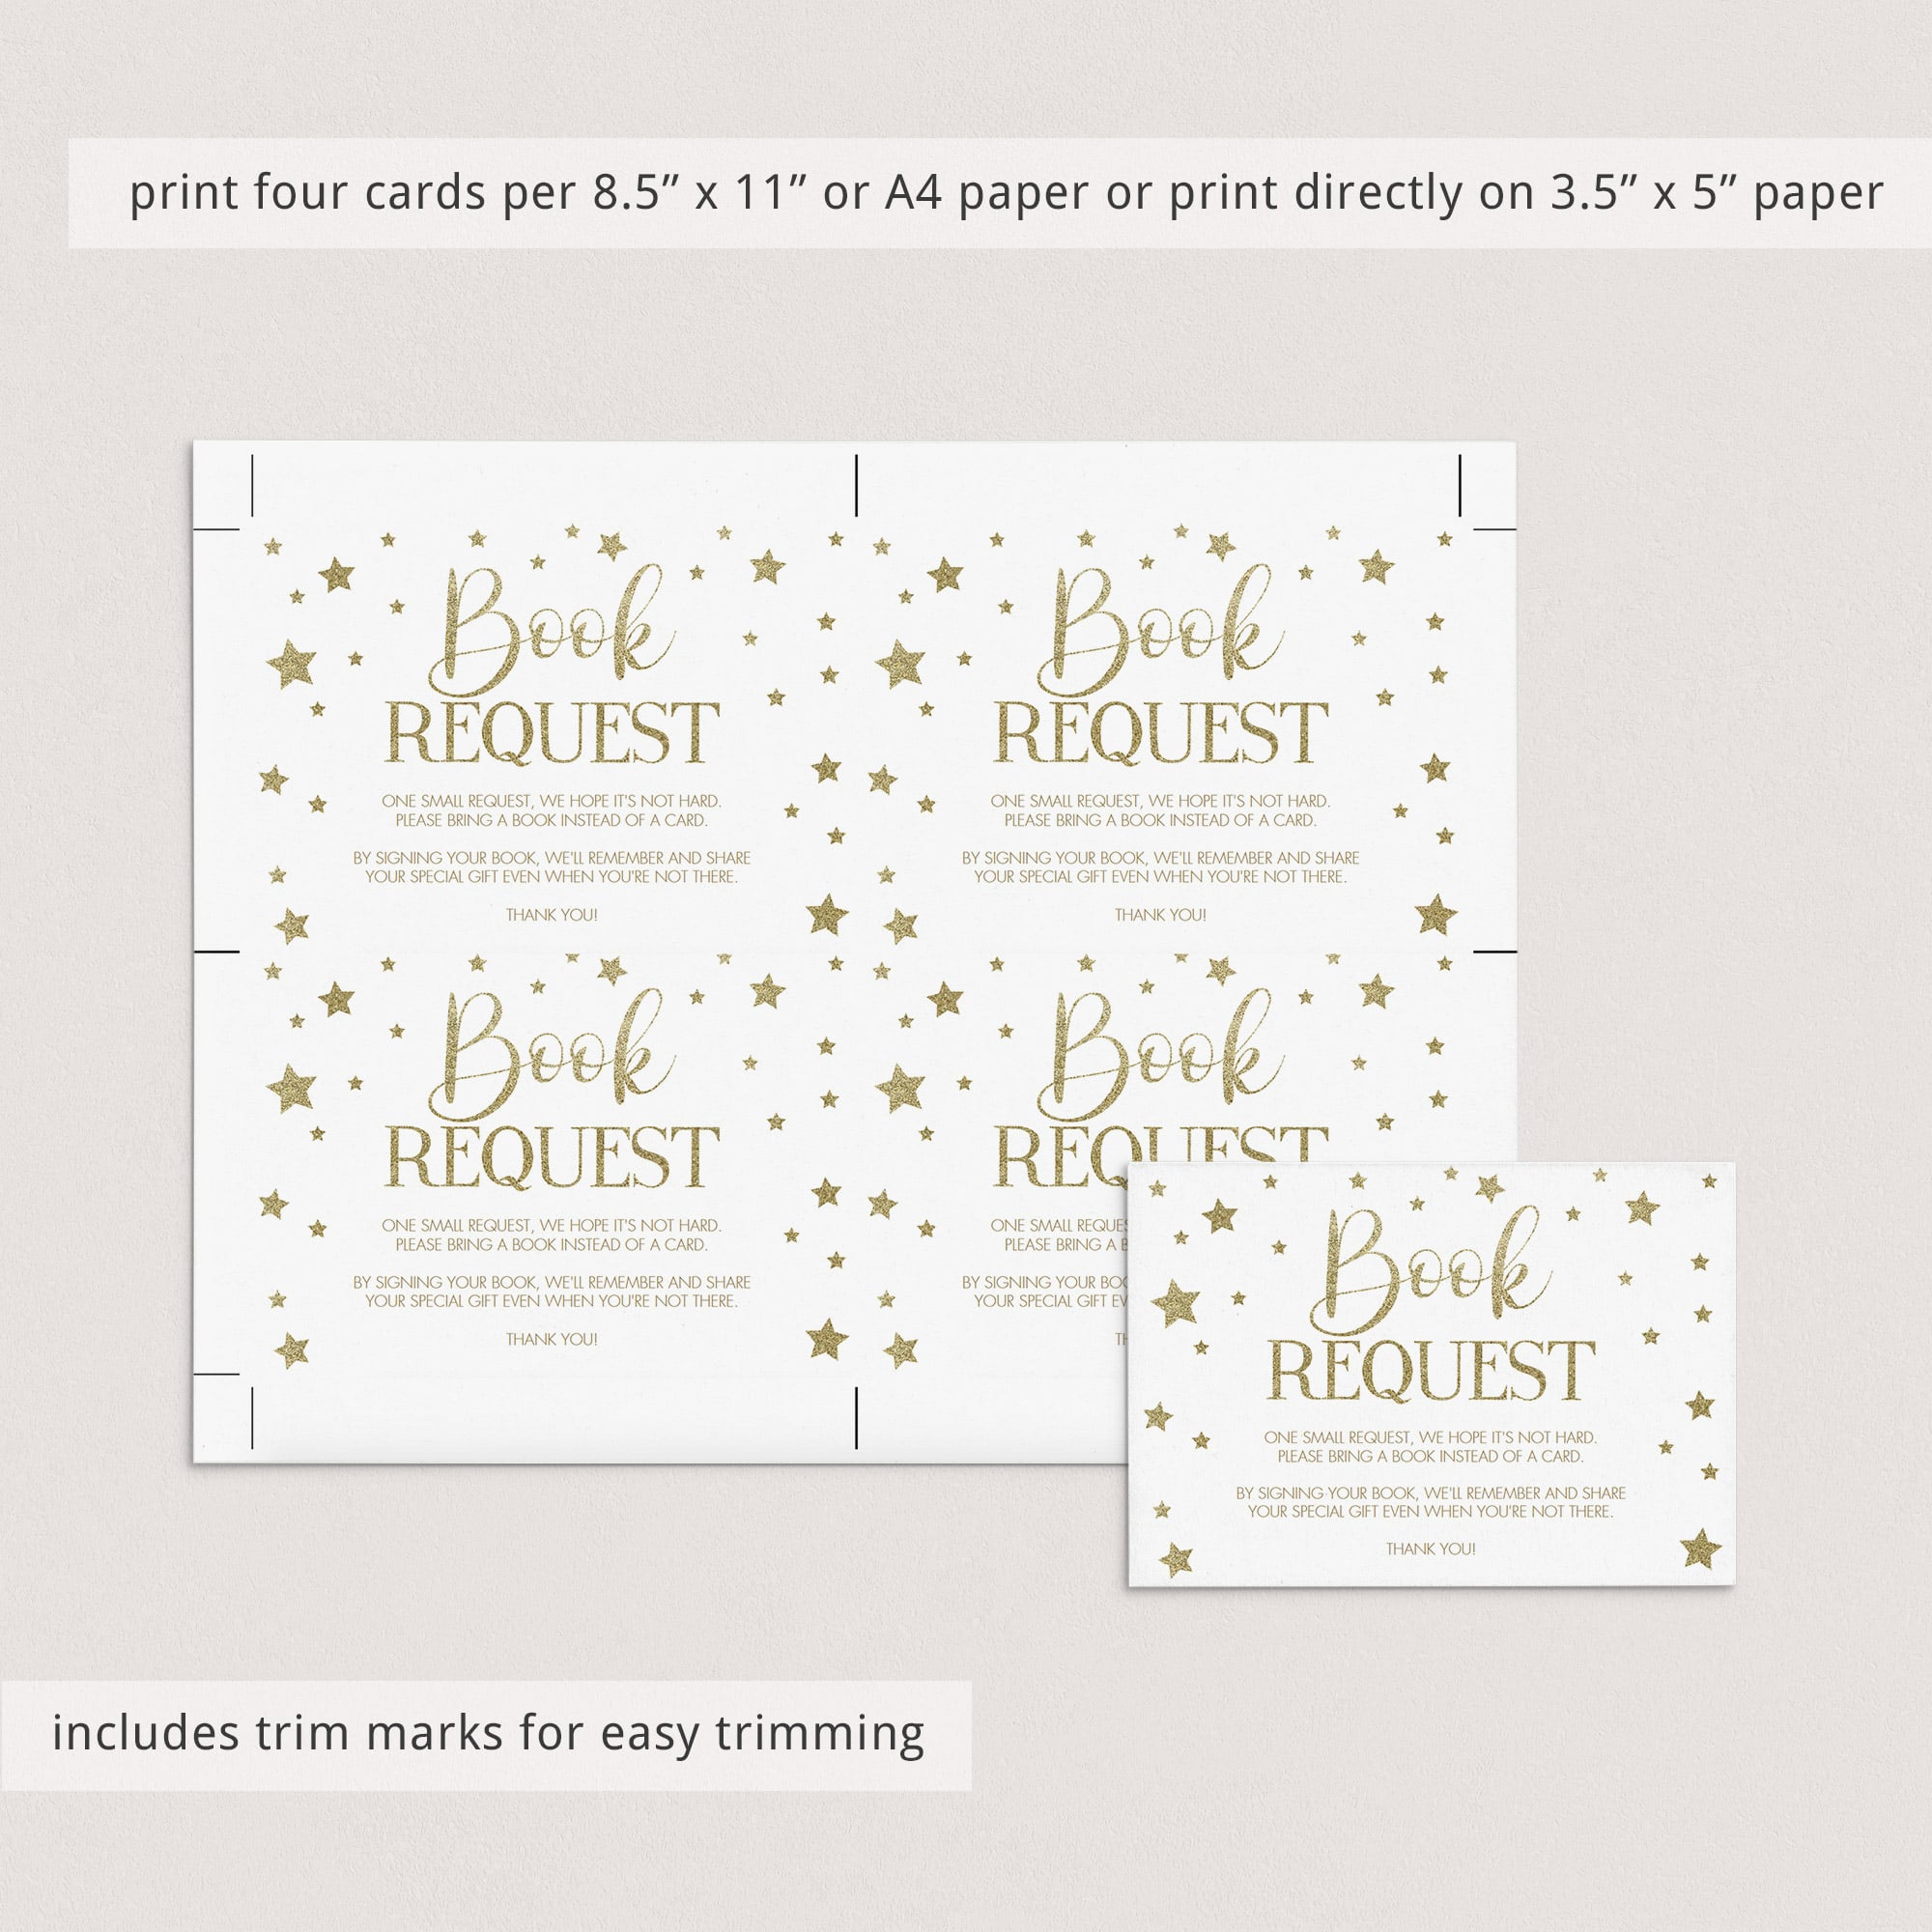 Bring a book for baby cards printable gold star by LittleSizzle